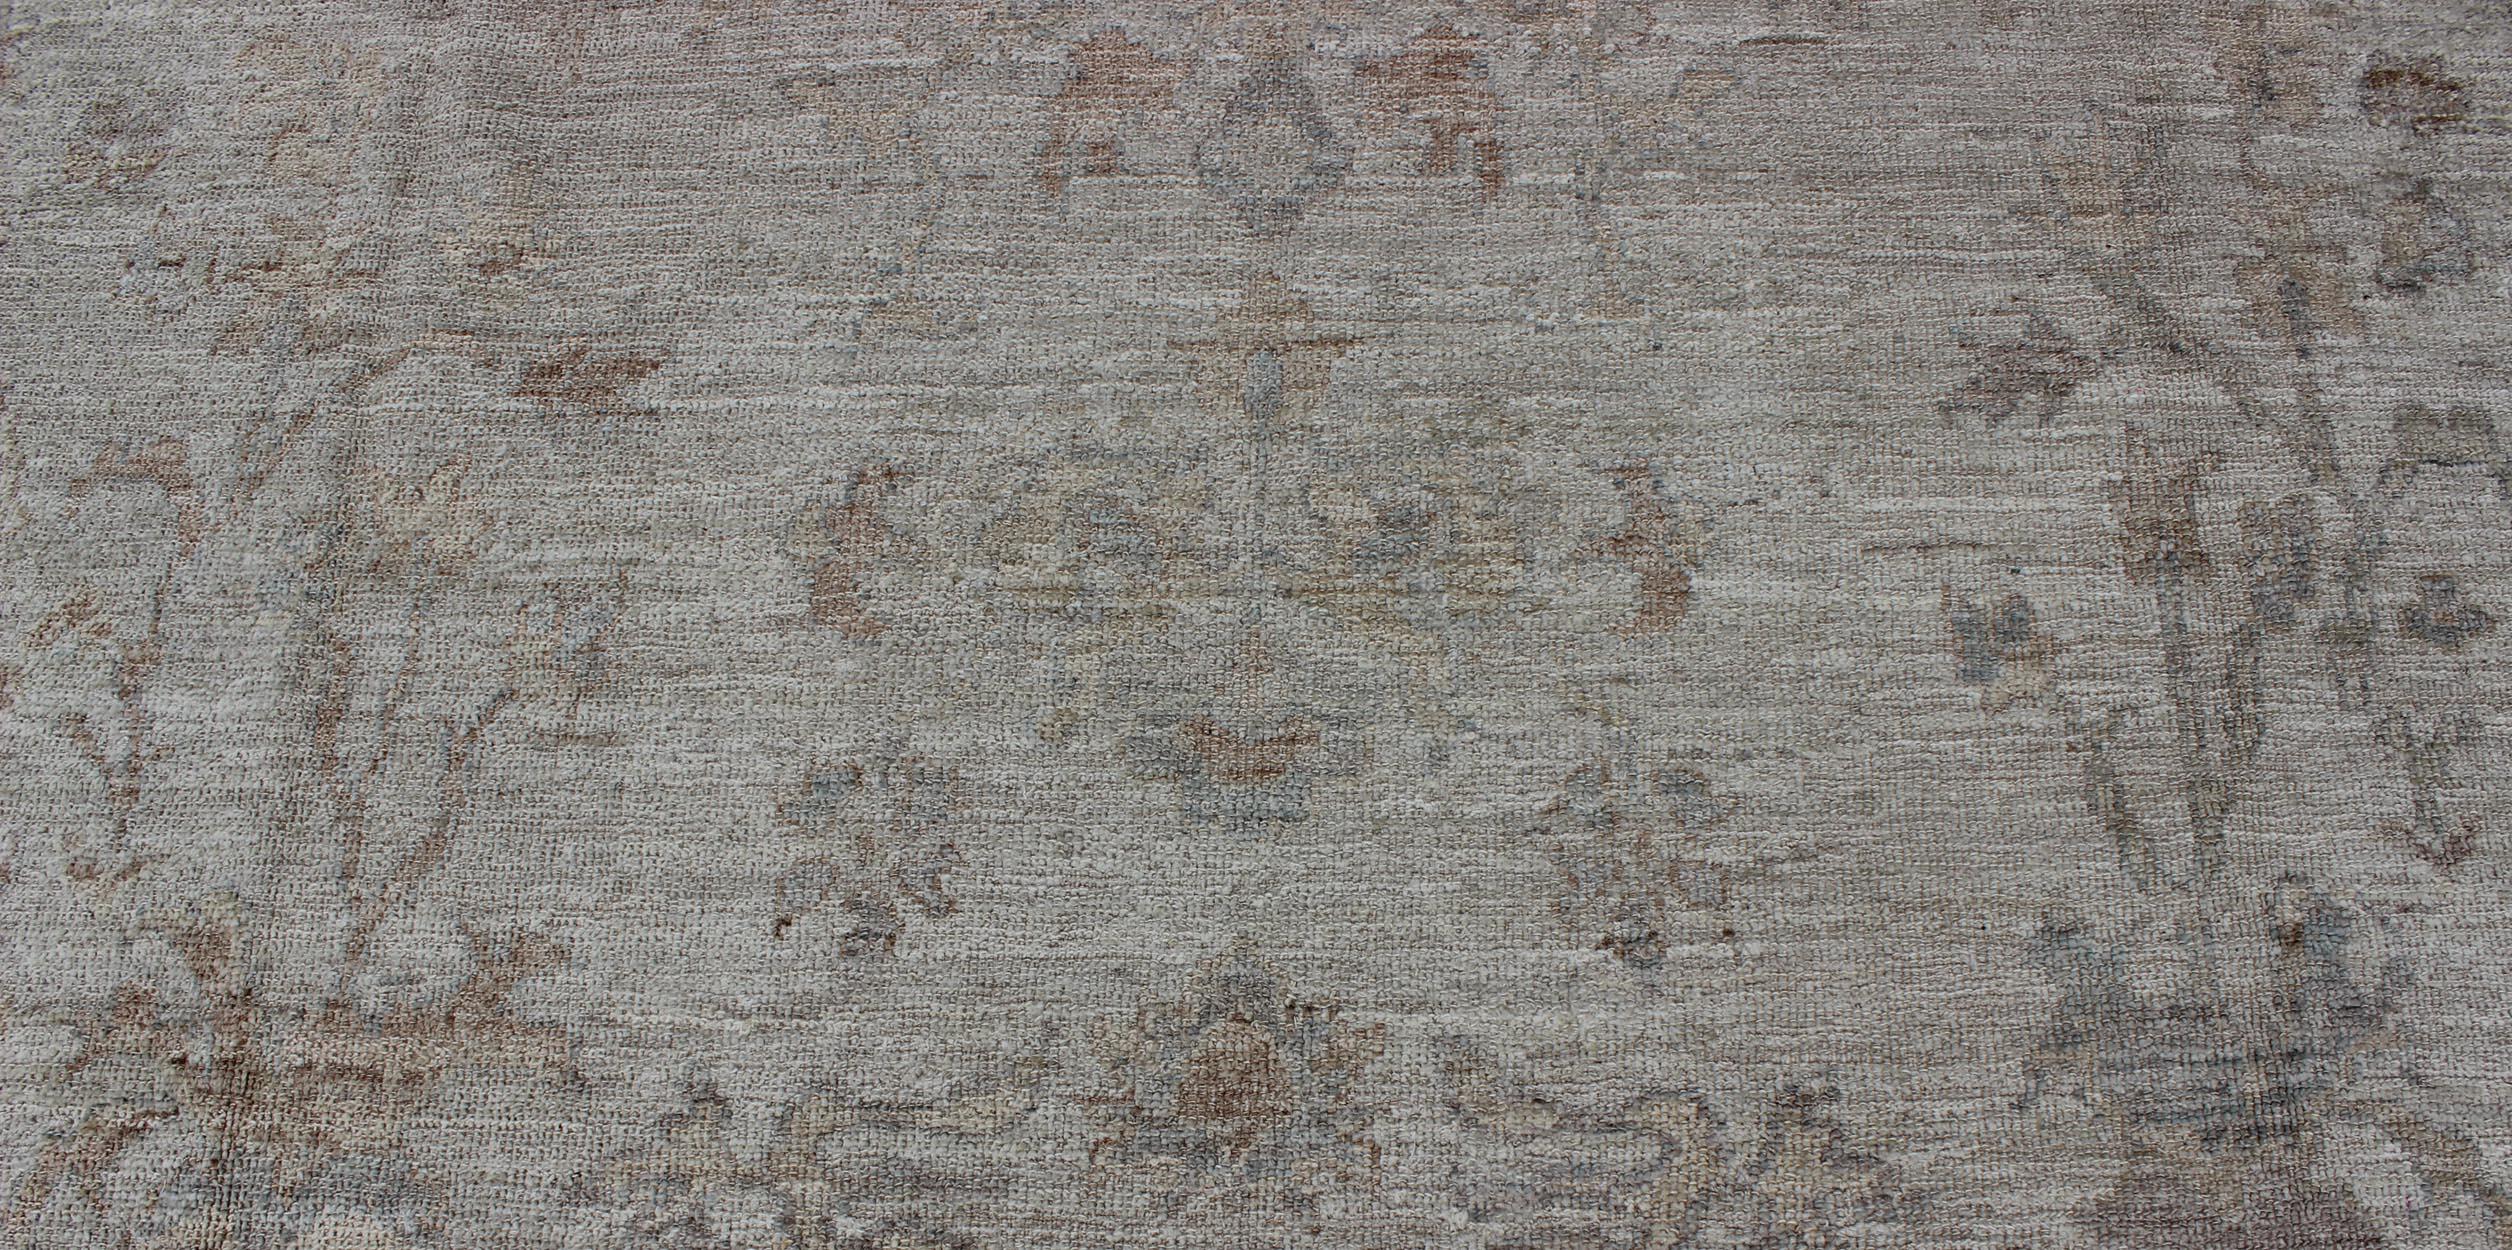 Large Angora Oushak Turkish Rug in Cream, Taupe, Silver, and Hints of Faded Blue For Sale 6